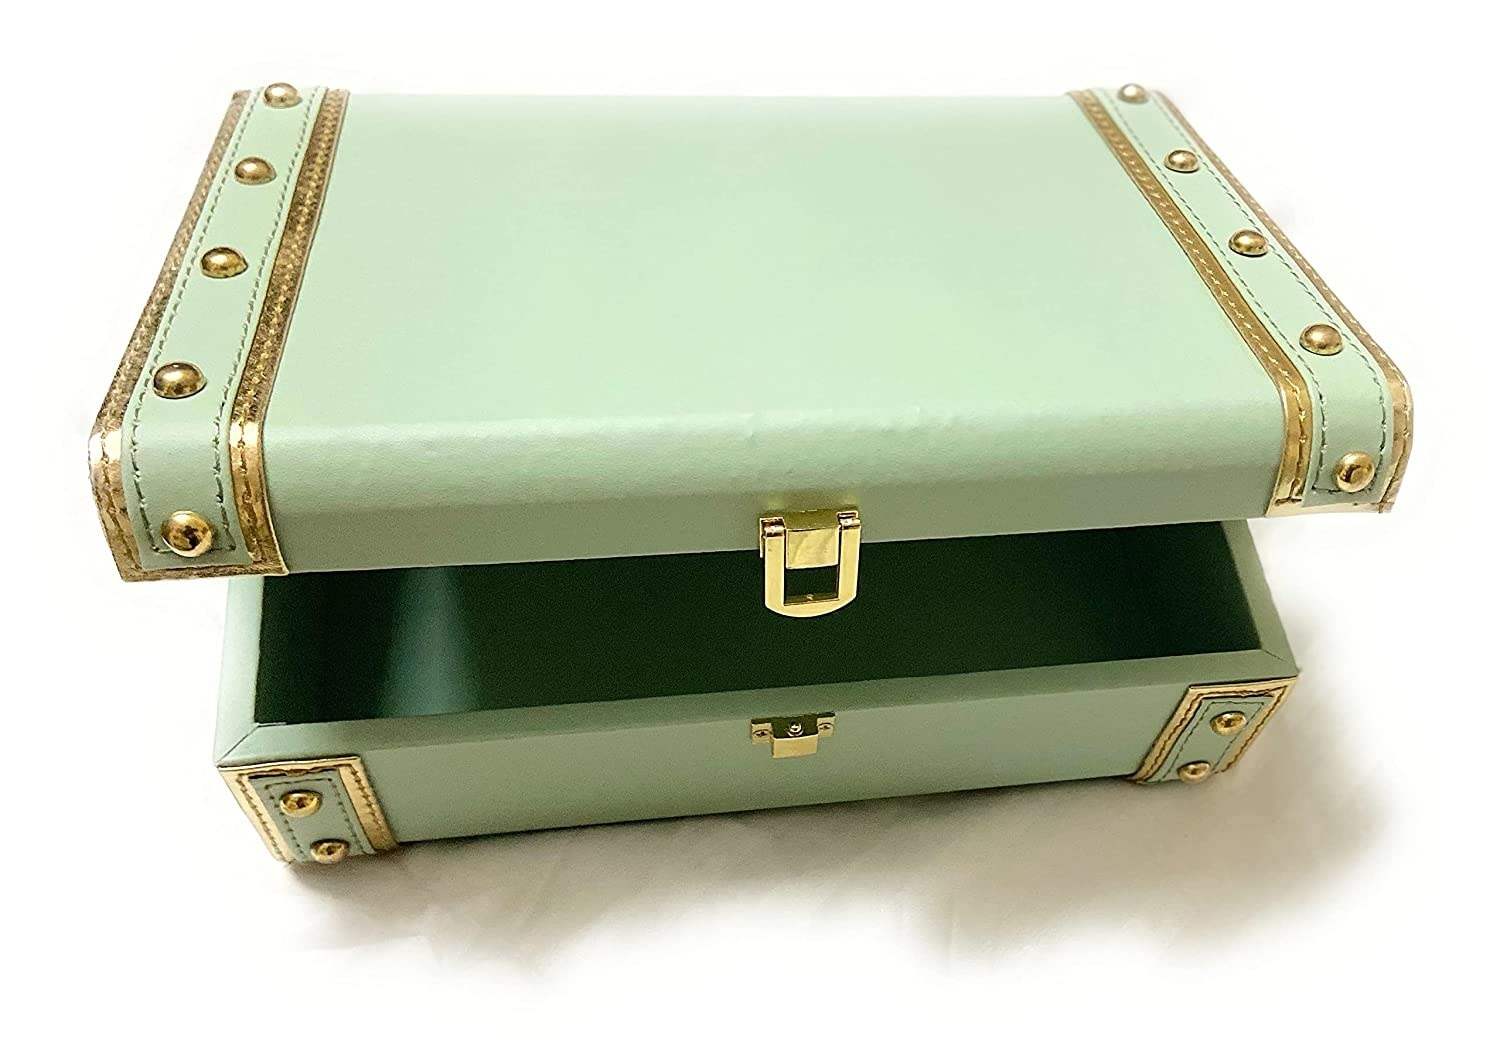 A mint storage box with golden embellishments